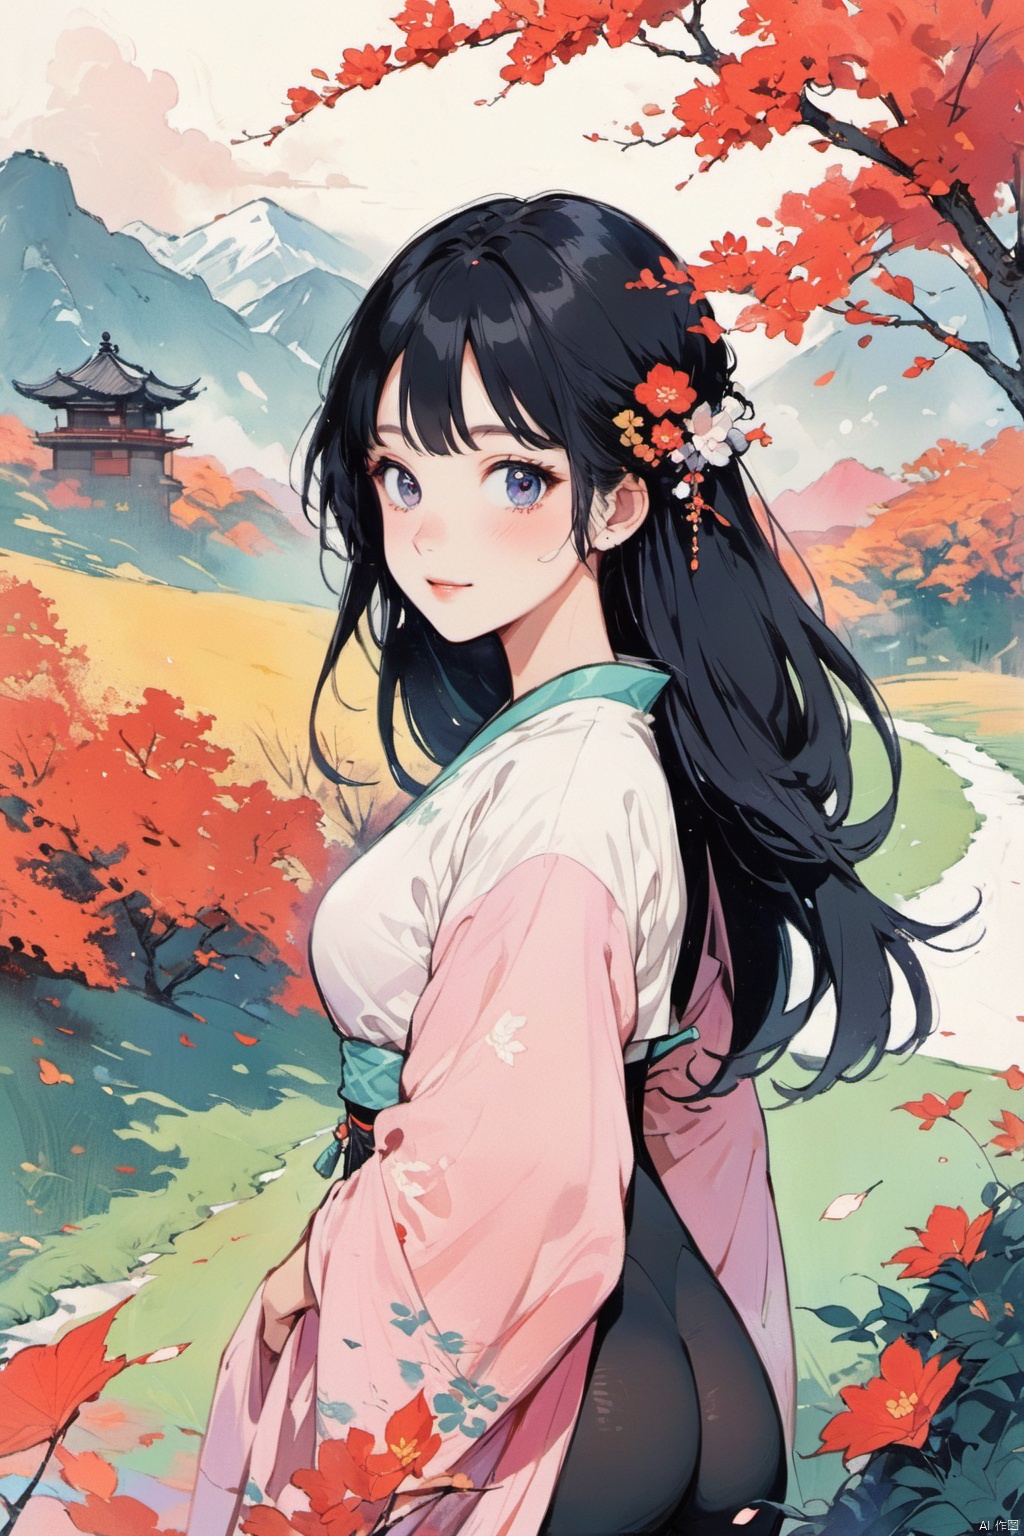  flat_style,simple_colors,masterpiece,{{{best_quality}}},{{ultra-detailed}},Hanfu,Holding a fan,{{1girl}},{{{solo}}},
an_extremely_delicate_and_beautifu,blank_stare,close_to_viewer,breeze,Flying_splashes,Flying_petals,wind,Gorgeous and rich graphics,
symmetrical composition,Beautiful face,looks like tangwei,cute,seductive smile,looking at the audience,big eyes,charming eyes,perfect figure,black hair, Illustration
pov,yoga,yoga pose,yoga bra,yoga pants,bare foot,
Distant snow mountains,and grasslands,
Autumn, red leaves, yellow leaves, Illustration